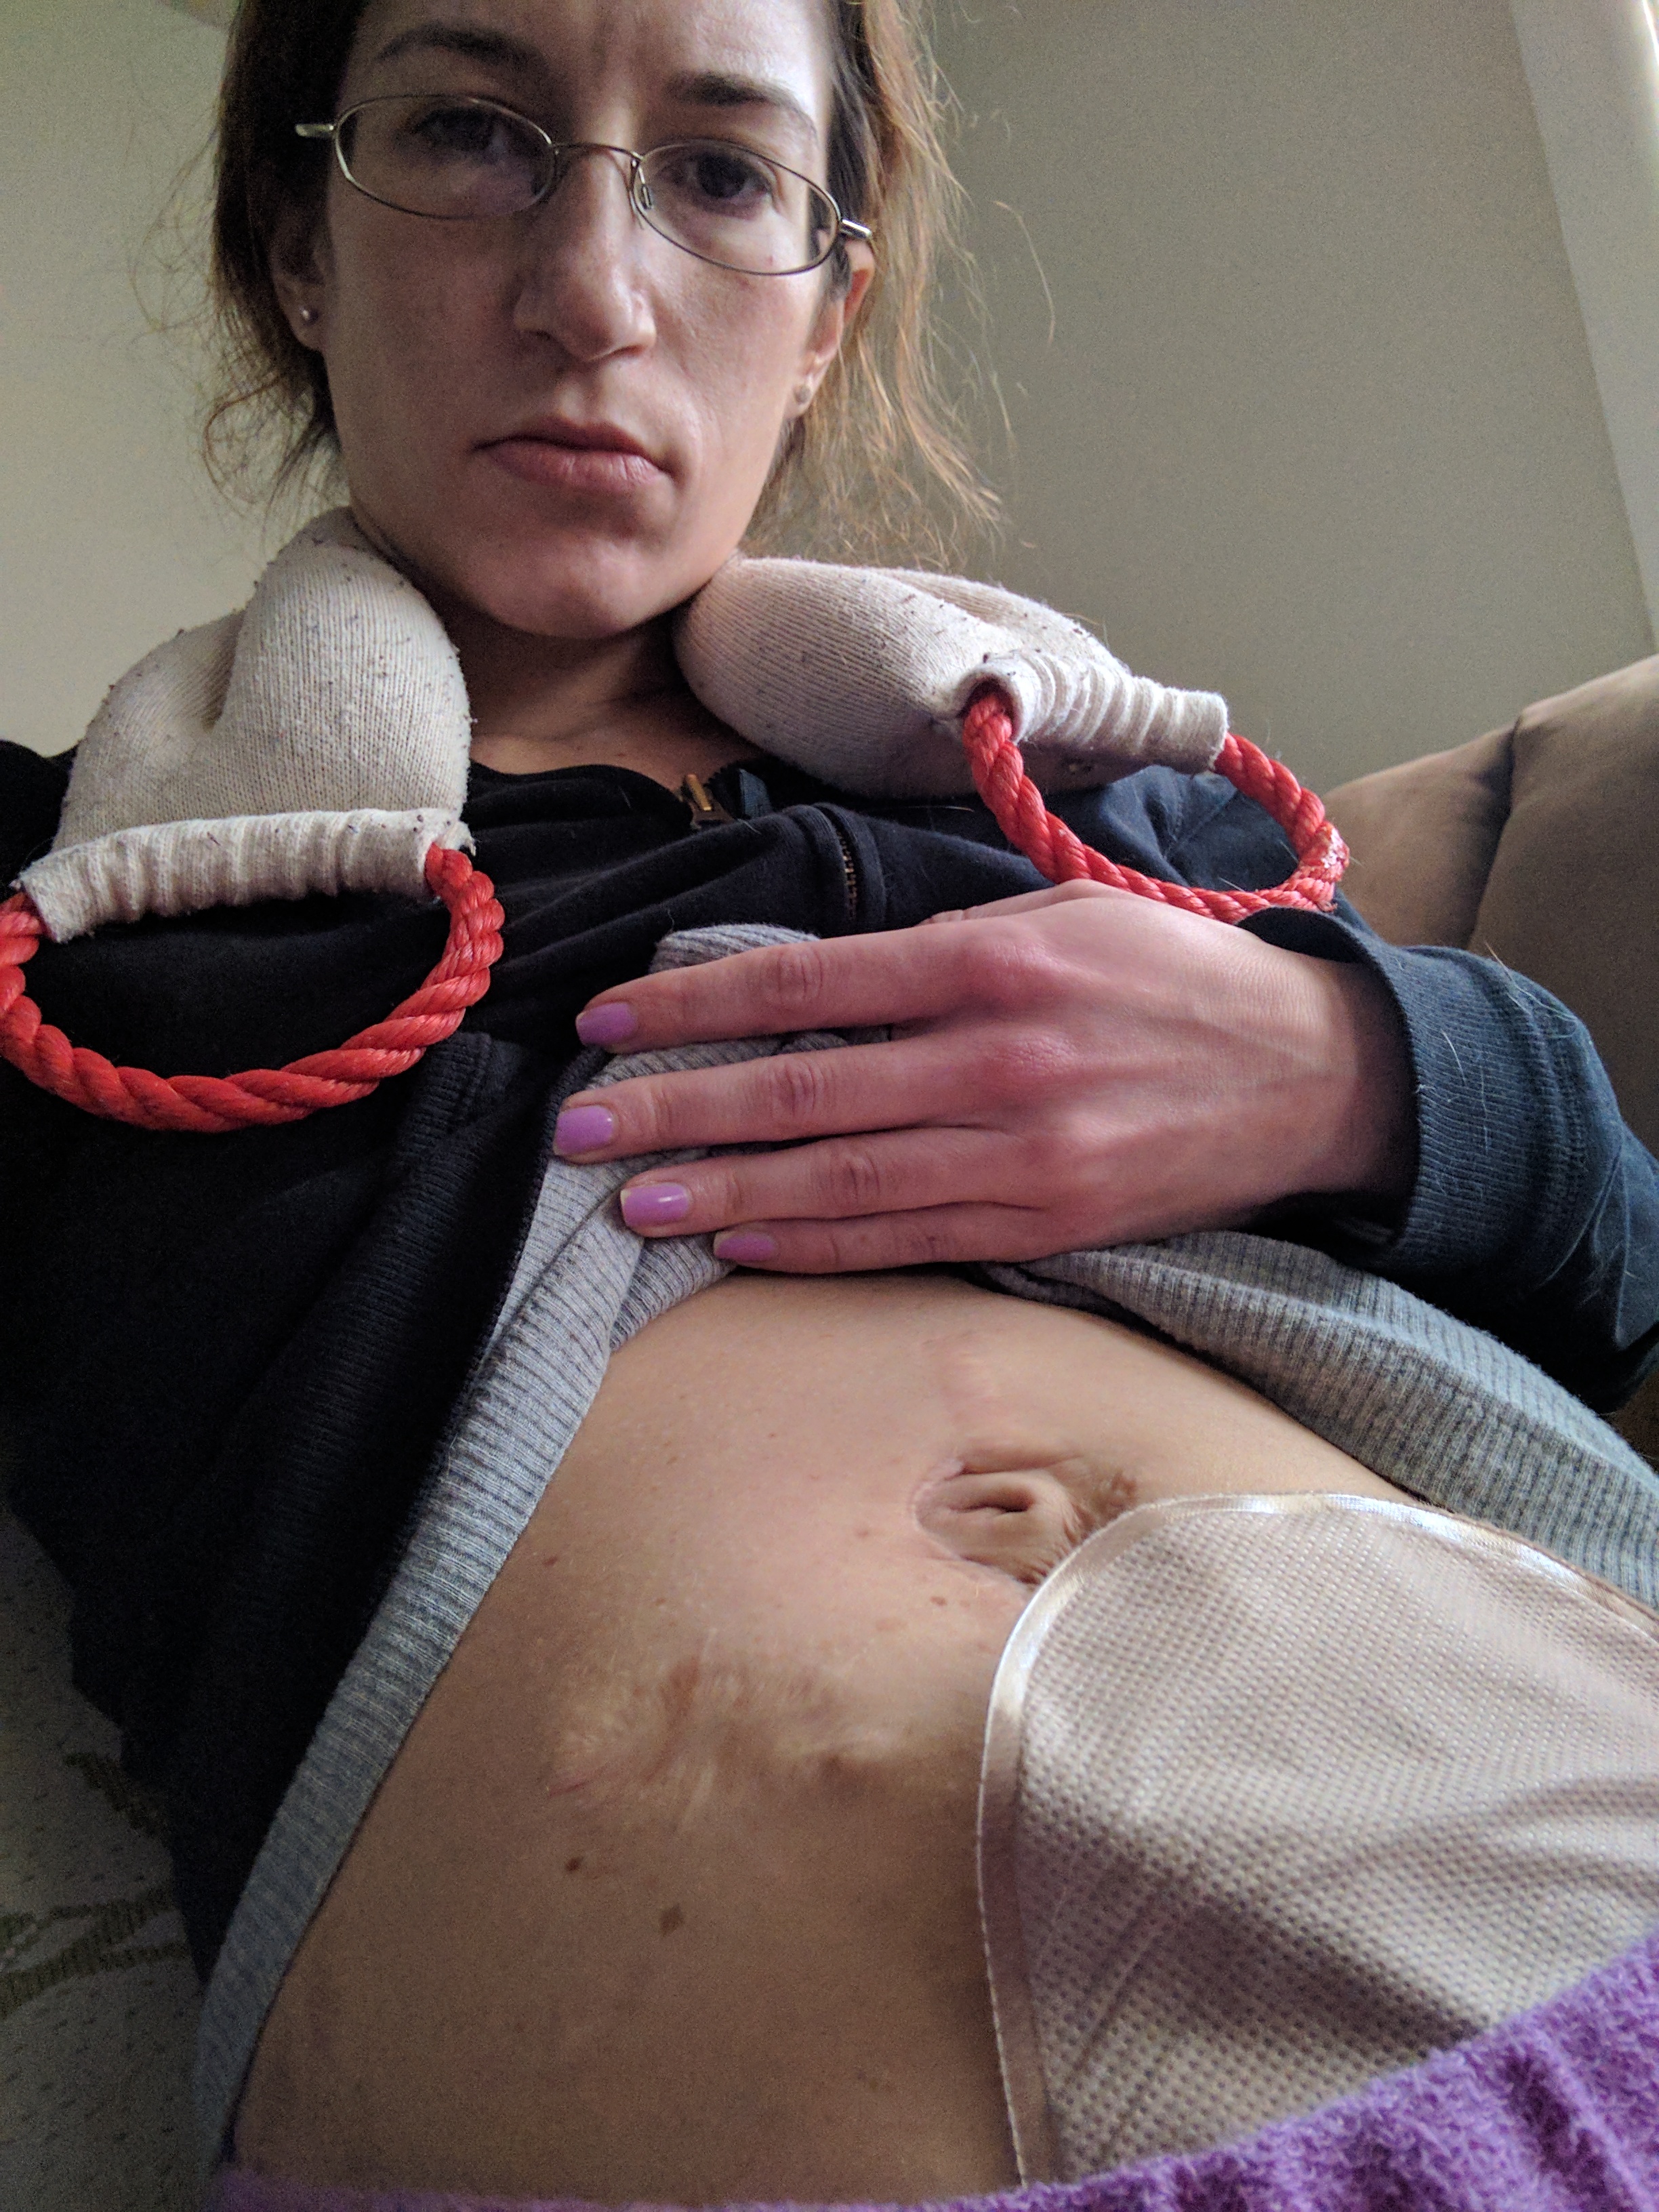 Marisa showing scar and distended stomach from previous surgeries and her permanent ileostomy